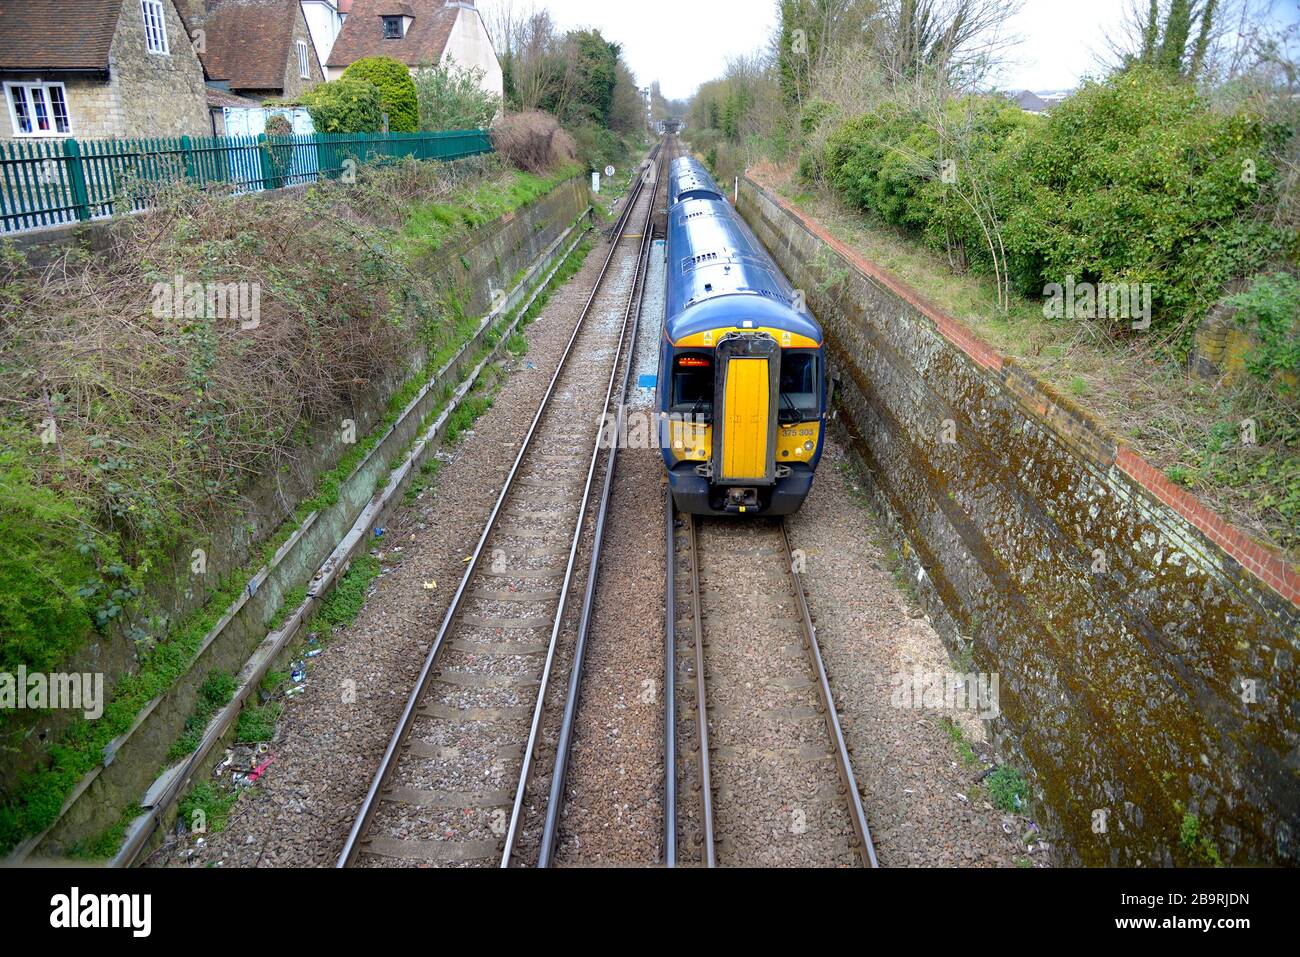 Maidstone, Kent, UK. British Rail Class 375 train passing through a cutting between Maidstone East and West stations Stock Photo